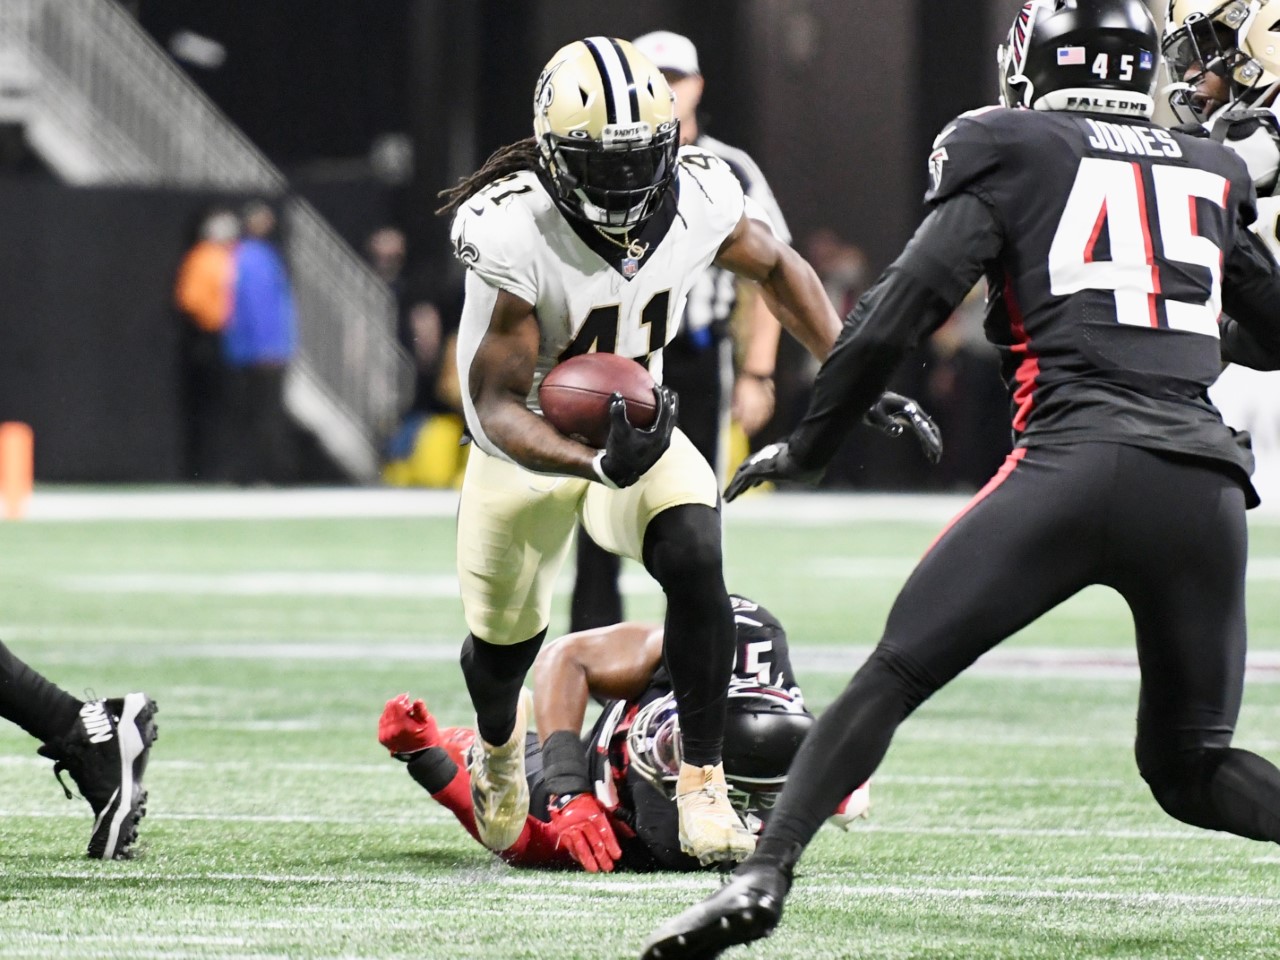 Kamara arrested on battery charge after Pro Bowl in Las Vegas